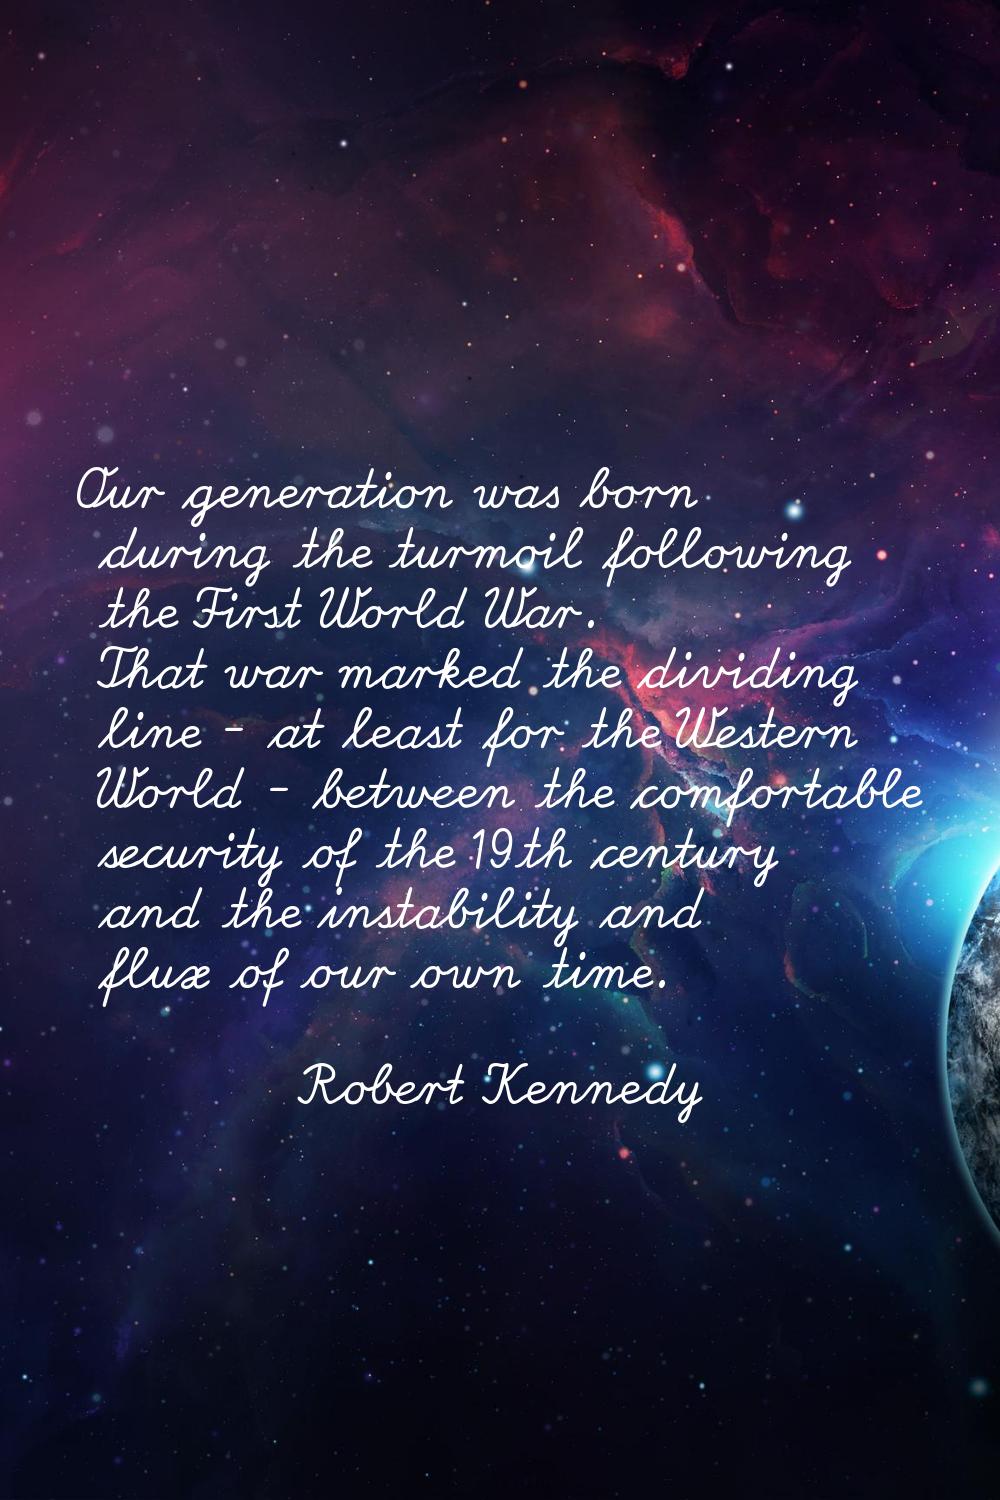 Our generation was born during the turmoil following the First World War. That war marked the divid